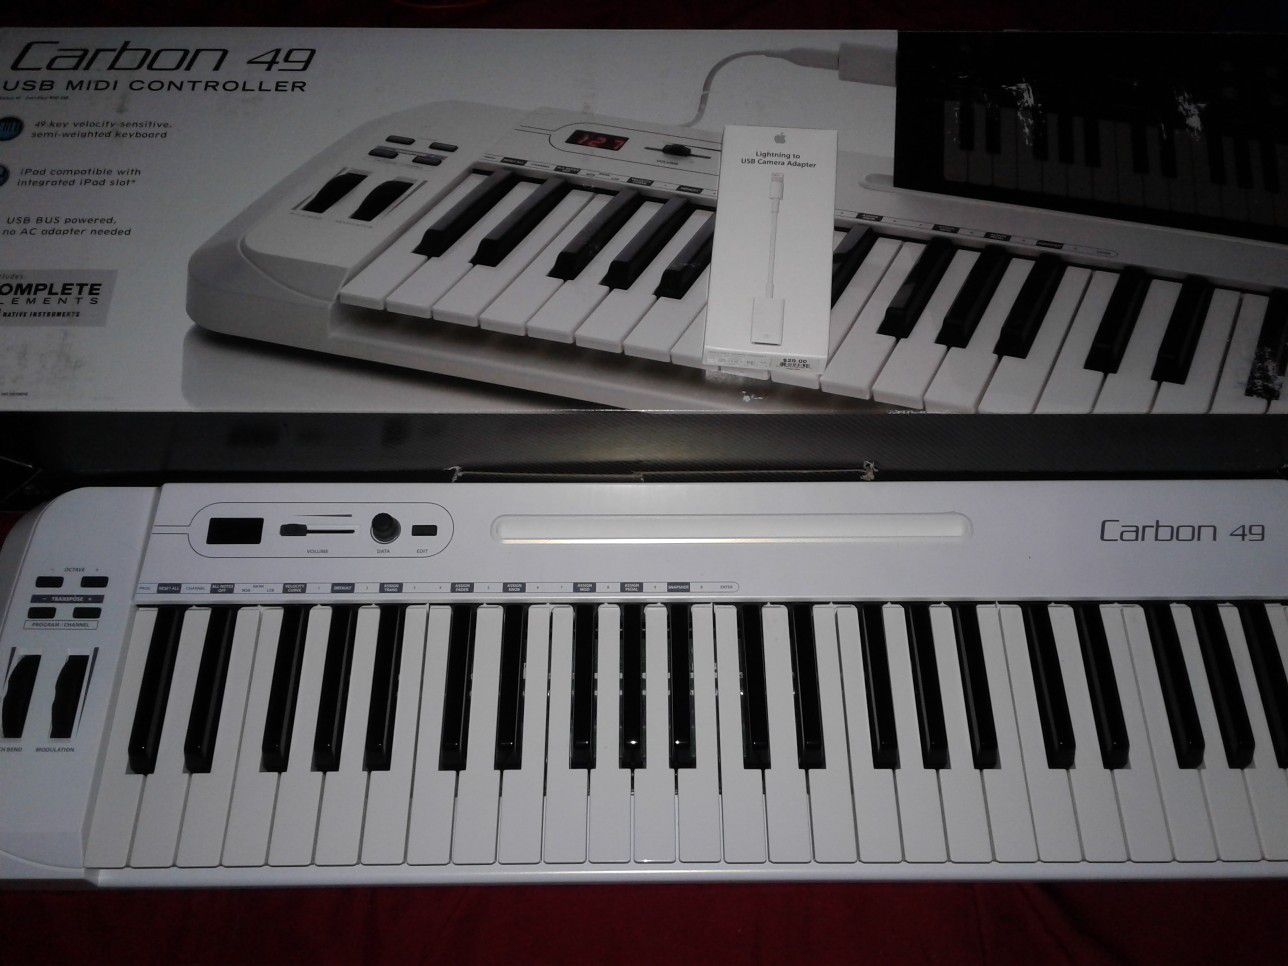 Samsung carbon 49. . It's 1 midi controller comes with Mac chord great for a gift.